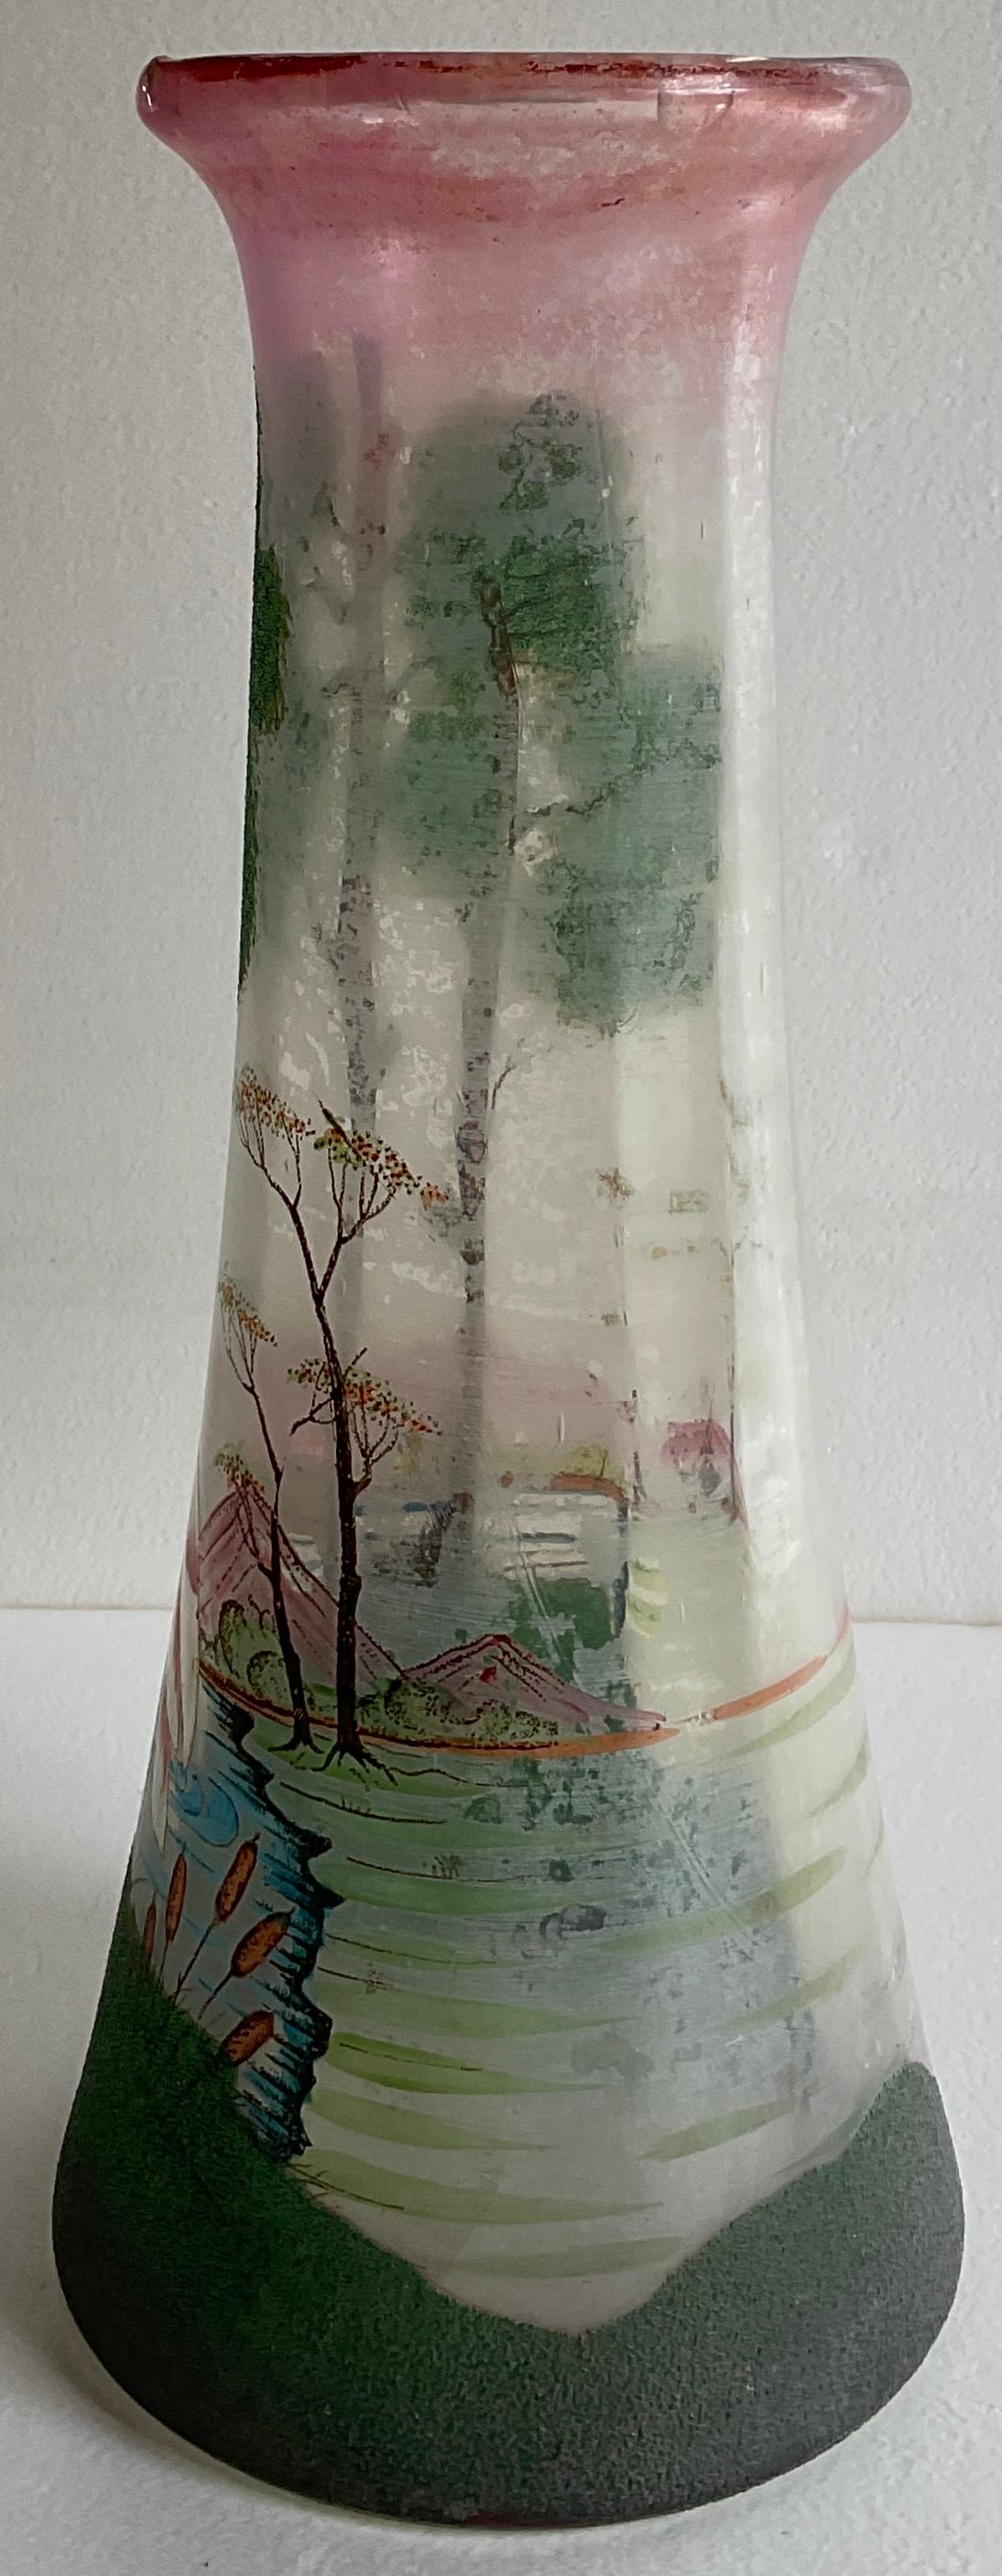 A beautiful French enameled glass vase from the Art Nouveau period, circa 1930.
Intricately detailed work is by François- Théodore Legras.

The tube of this vase is slightly enlarged and has a pink/purple background. It is hand-decorated with trees,